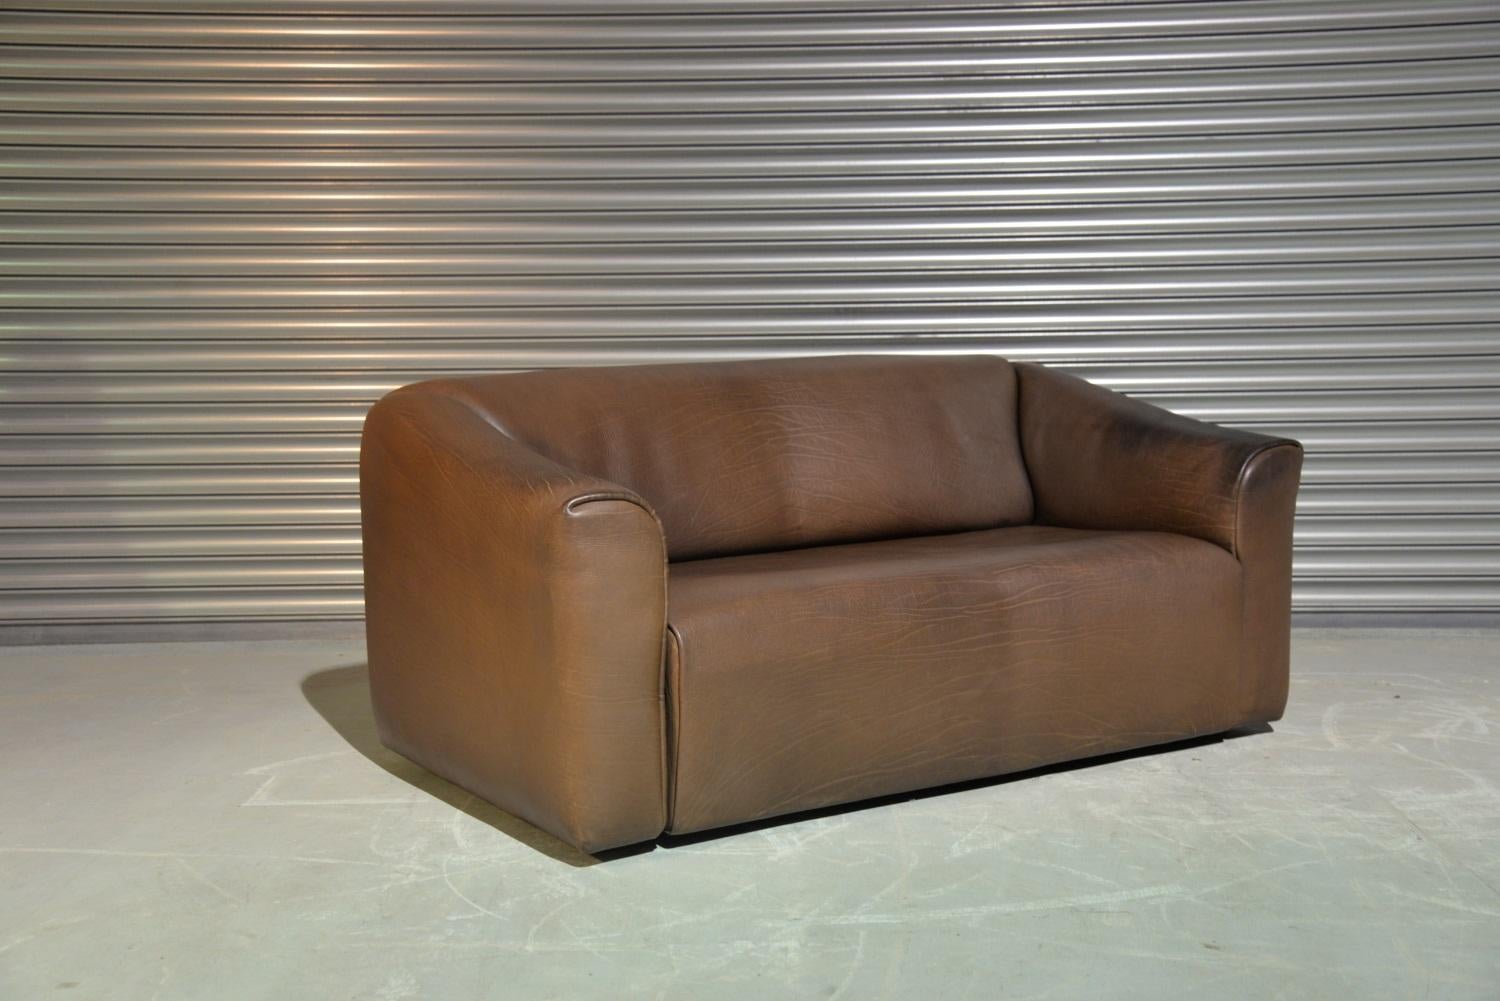 Discounted shipping rates for our US and International customers ( from 2 weeks door to door ) 

We are delighted to bring to you an ultra rare vintage De Sede DS 47 leather sofa. Hand built in the 1970s by De Sede craftsman in Switzerland, these